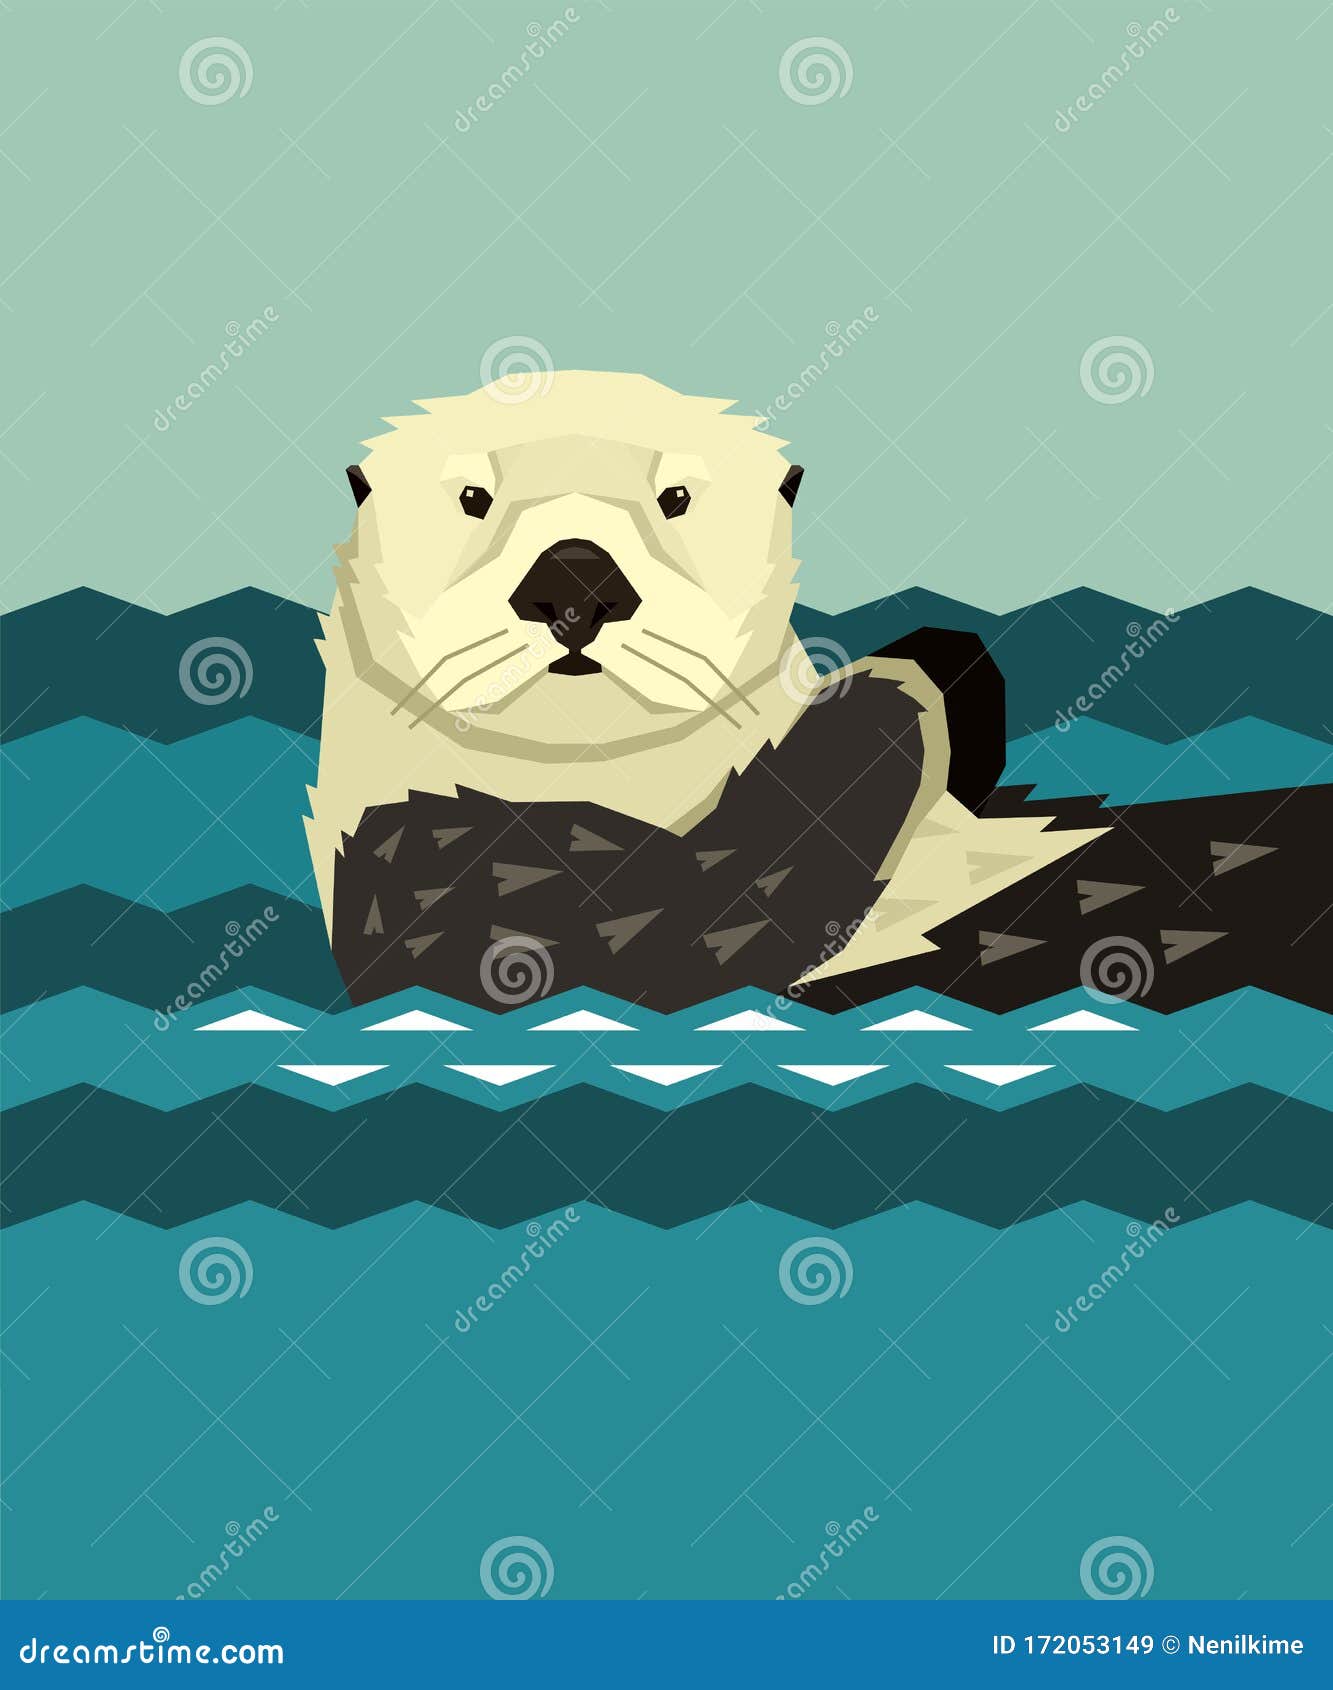 Sea Otter Floating In The Water Wild Animals Cartoon Vector